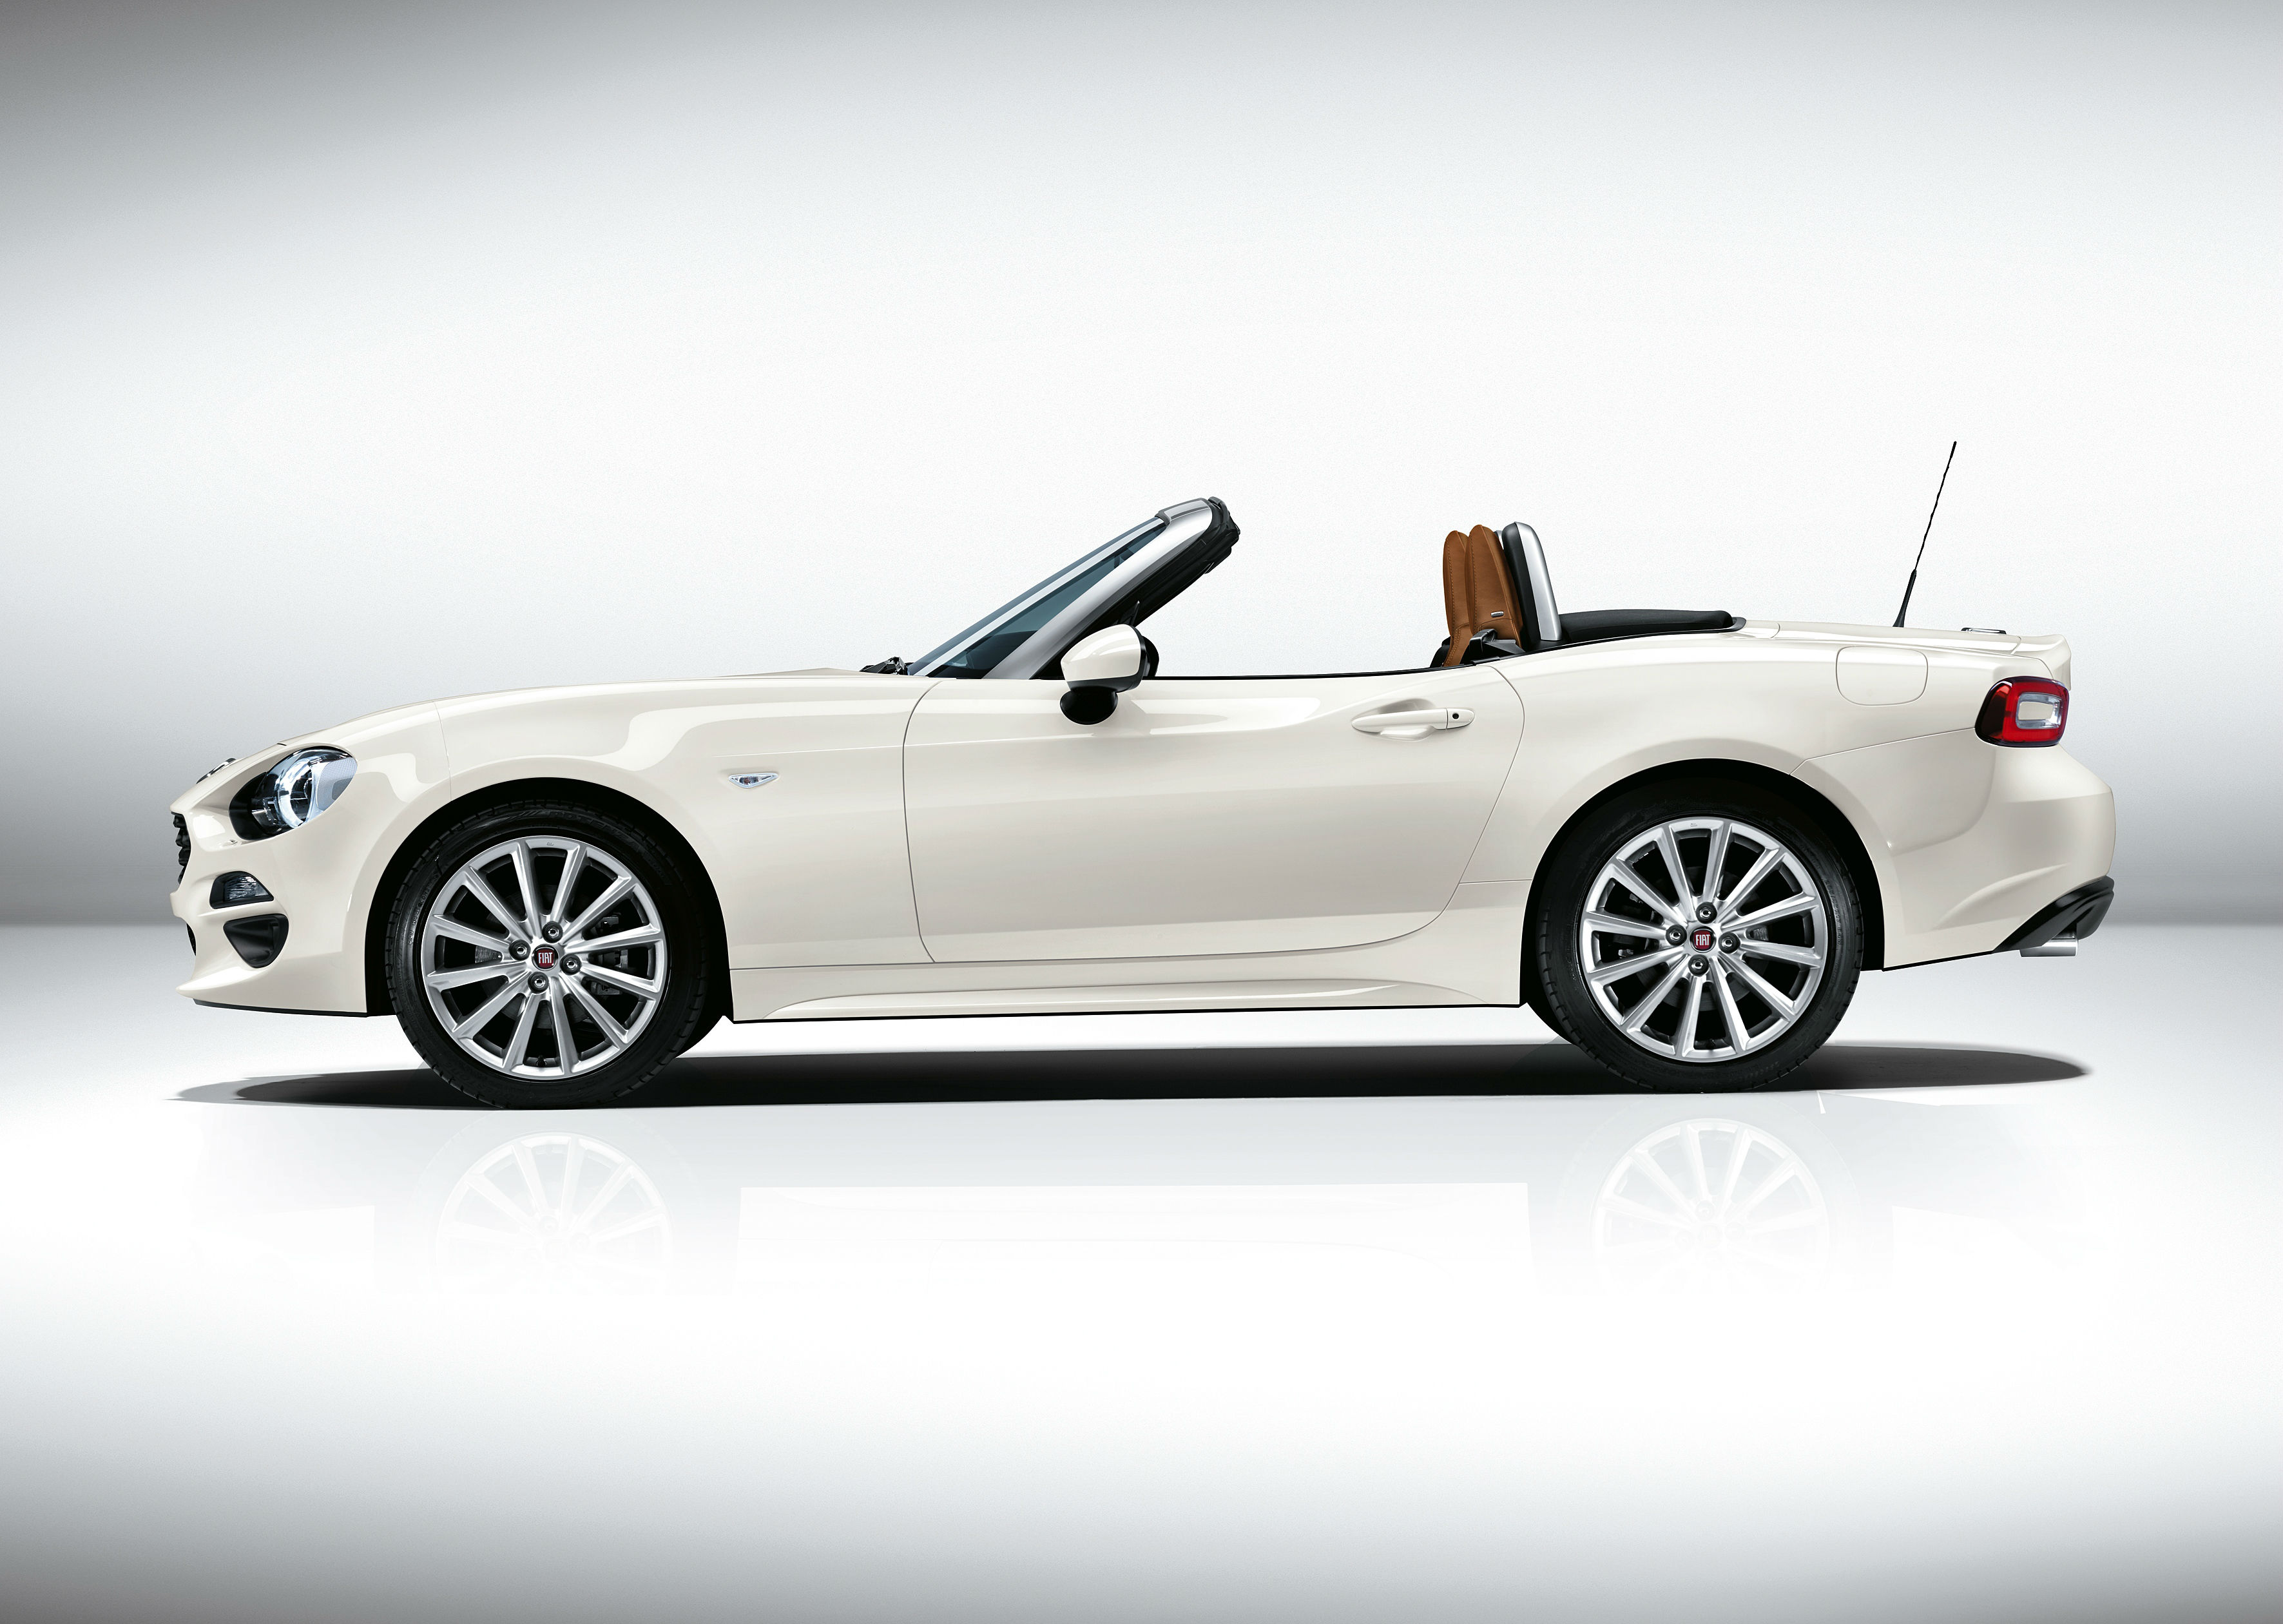 2015 Fiat 124 Spider goes on sale in the summer, 2016